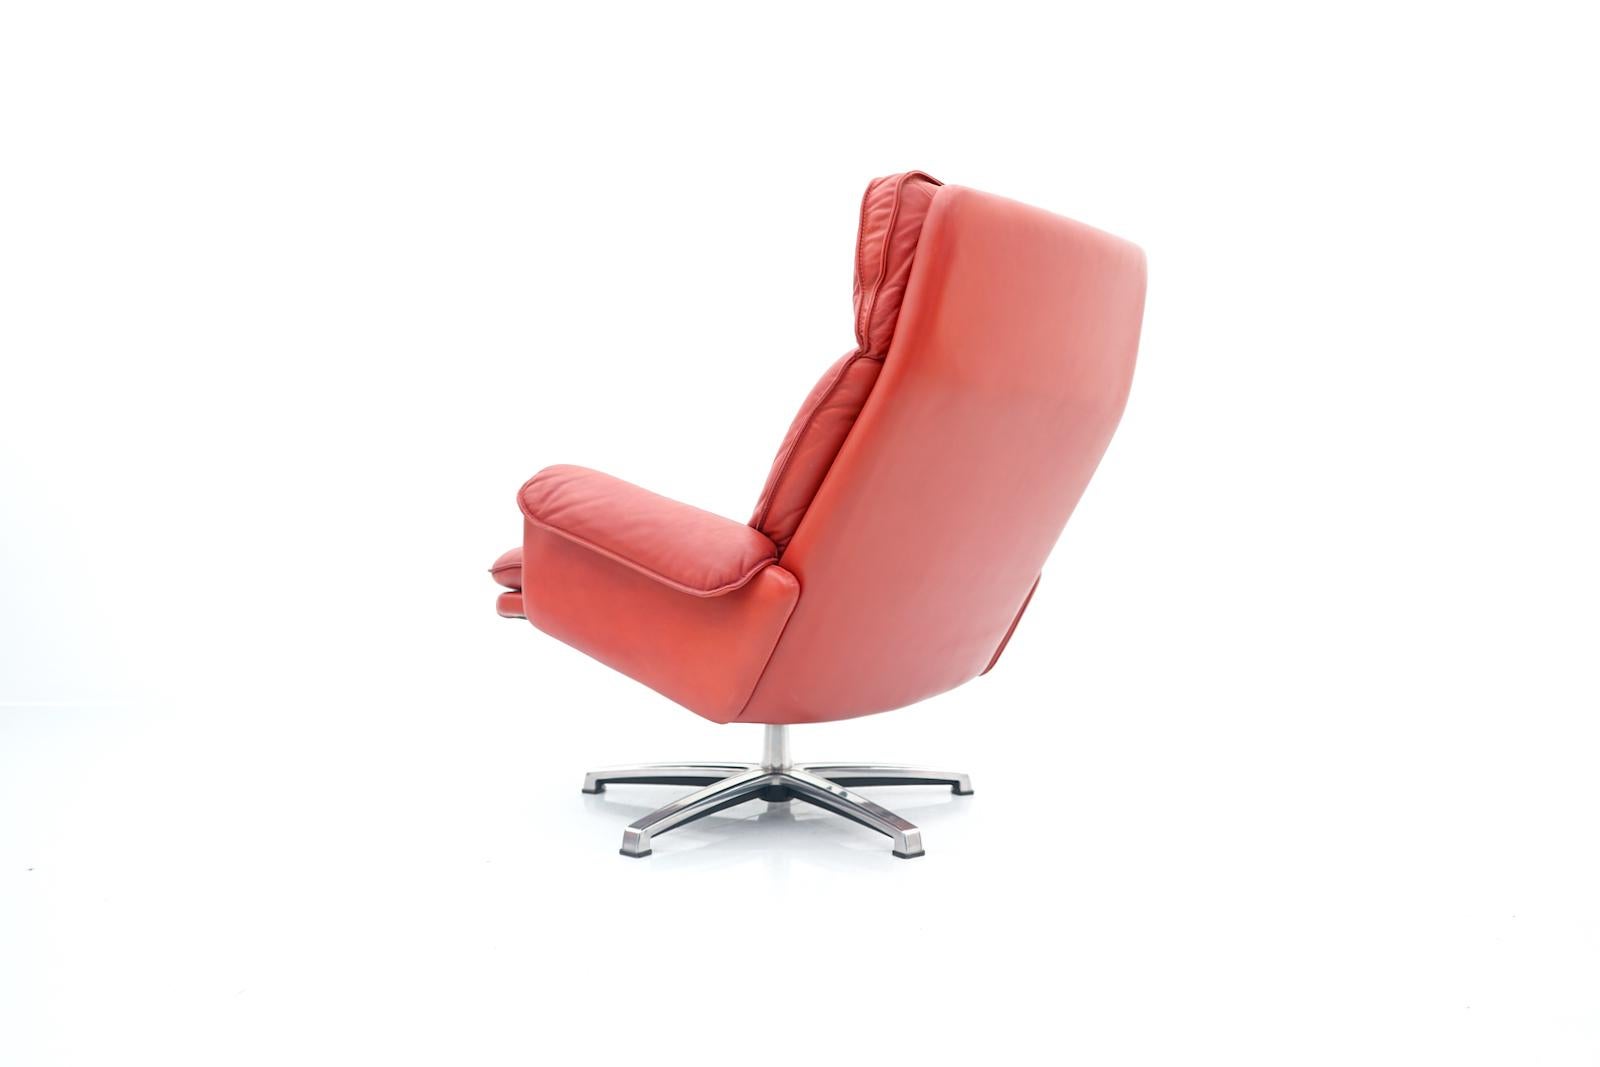 Swivel lounge chair in red leather from Norway, circa late 70s. The backrest tilts to the rear.
Very good condition. Very comfortable.
Measures: H 95 cm, D 85 cm, D 95 cm, SH 40 cm.
 